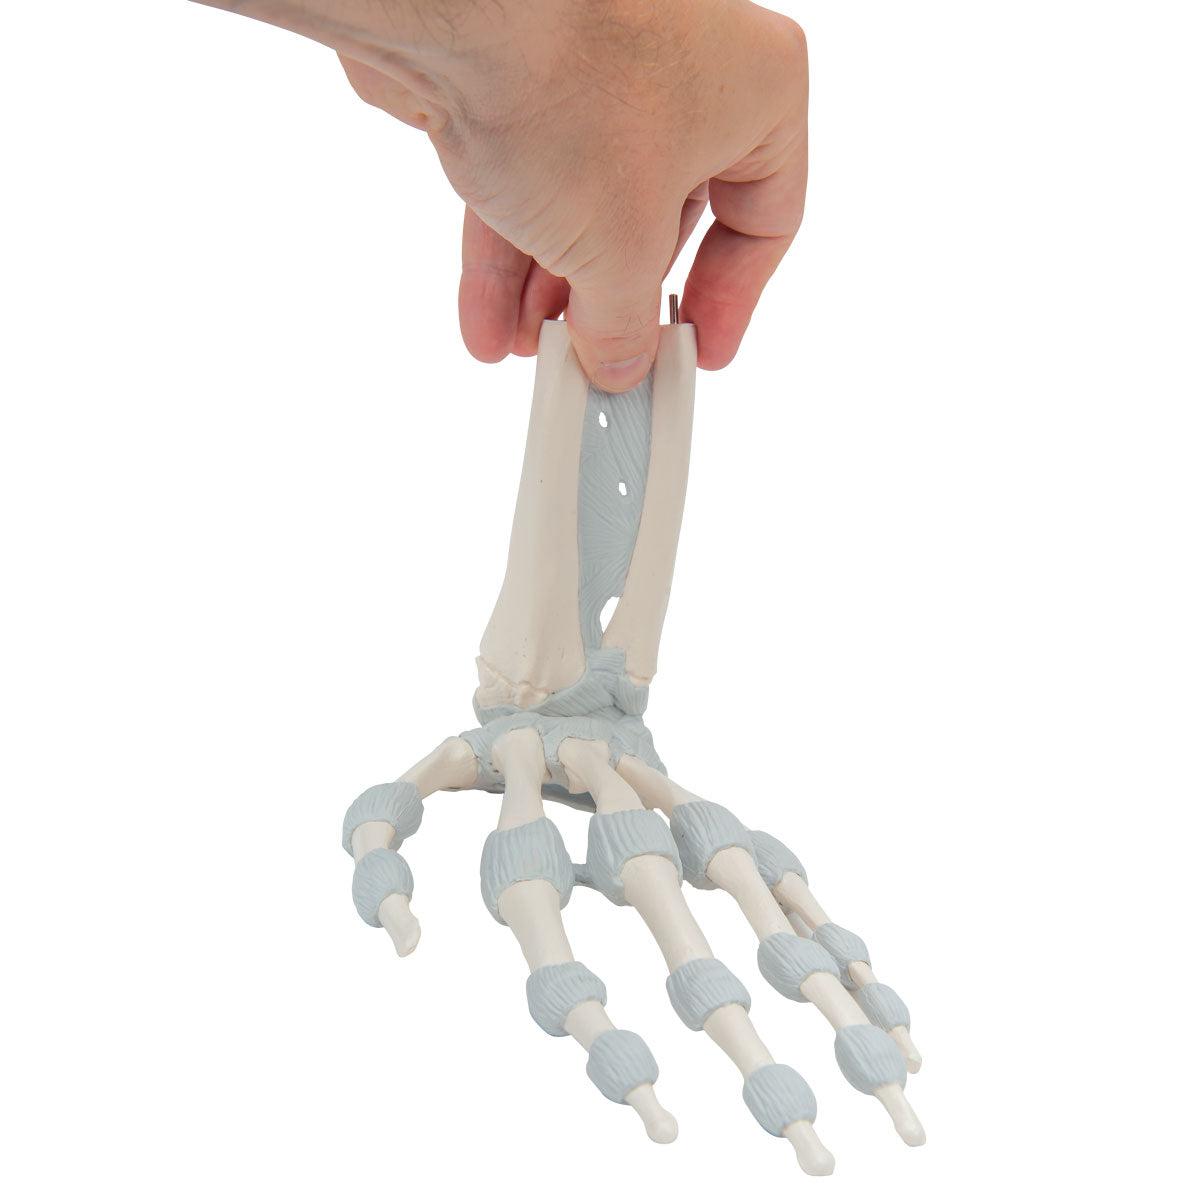 Flexible hand model with elastic ligaments 